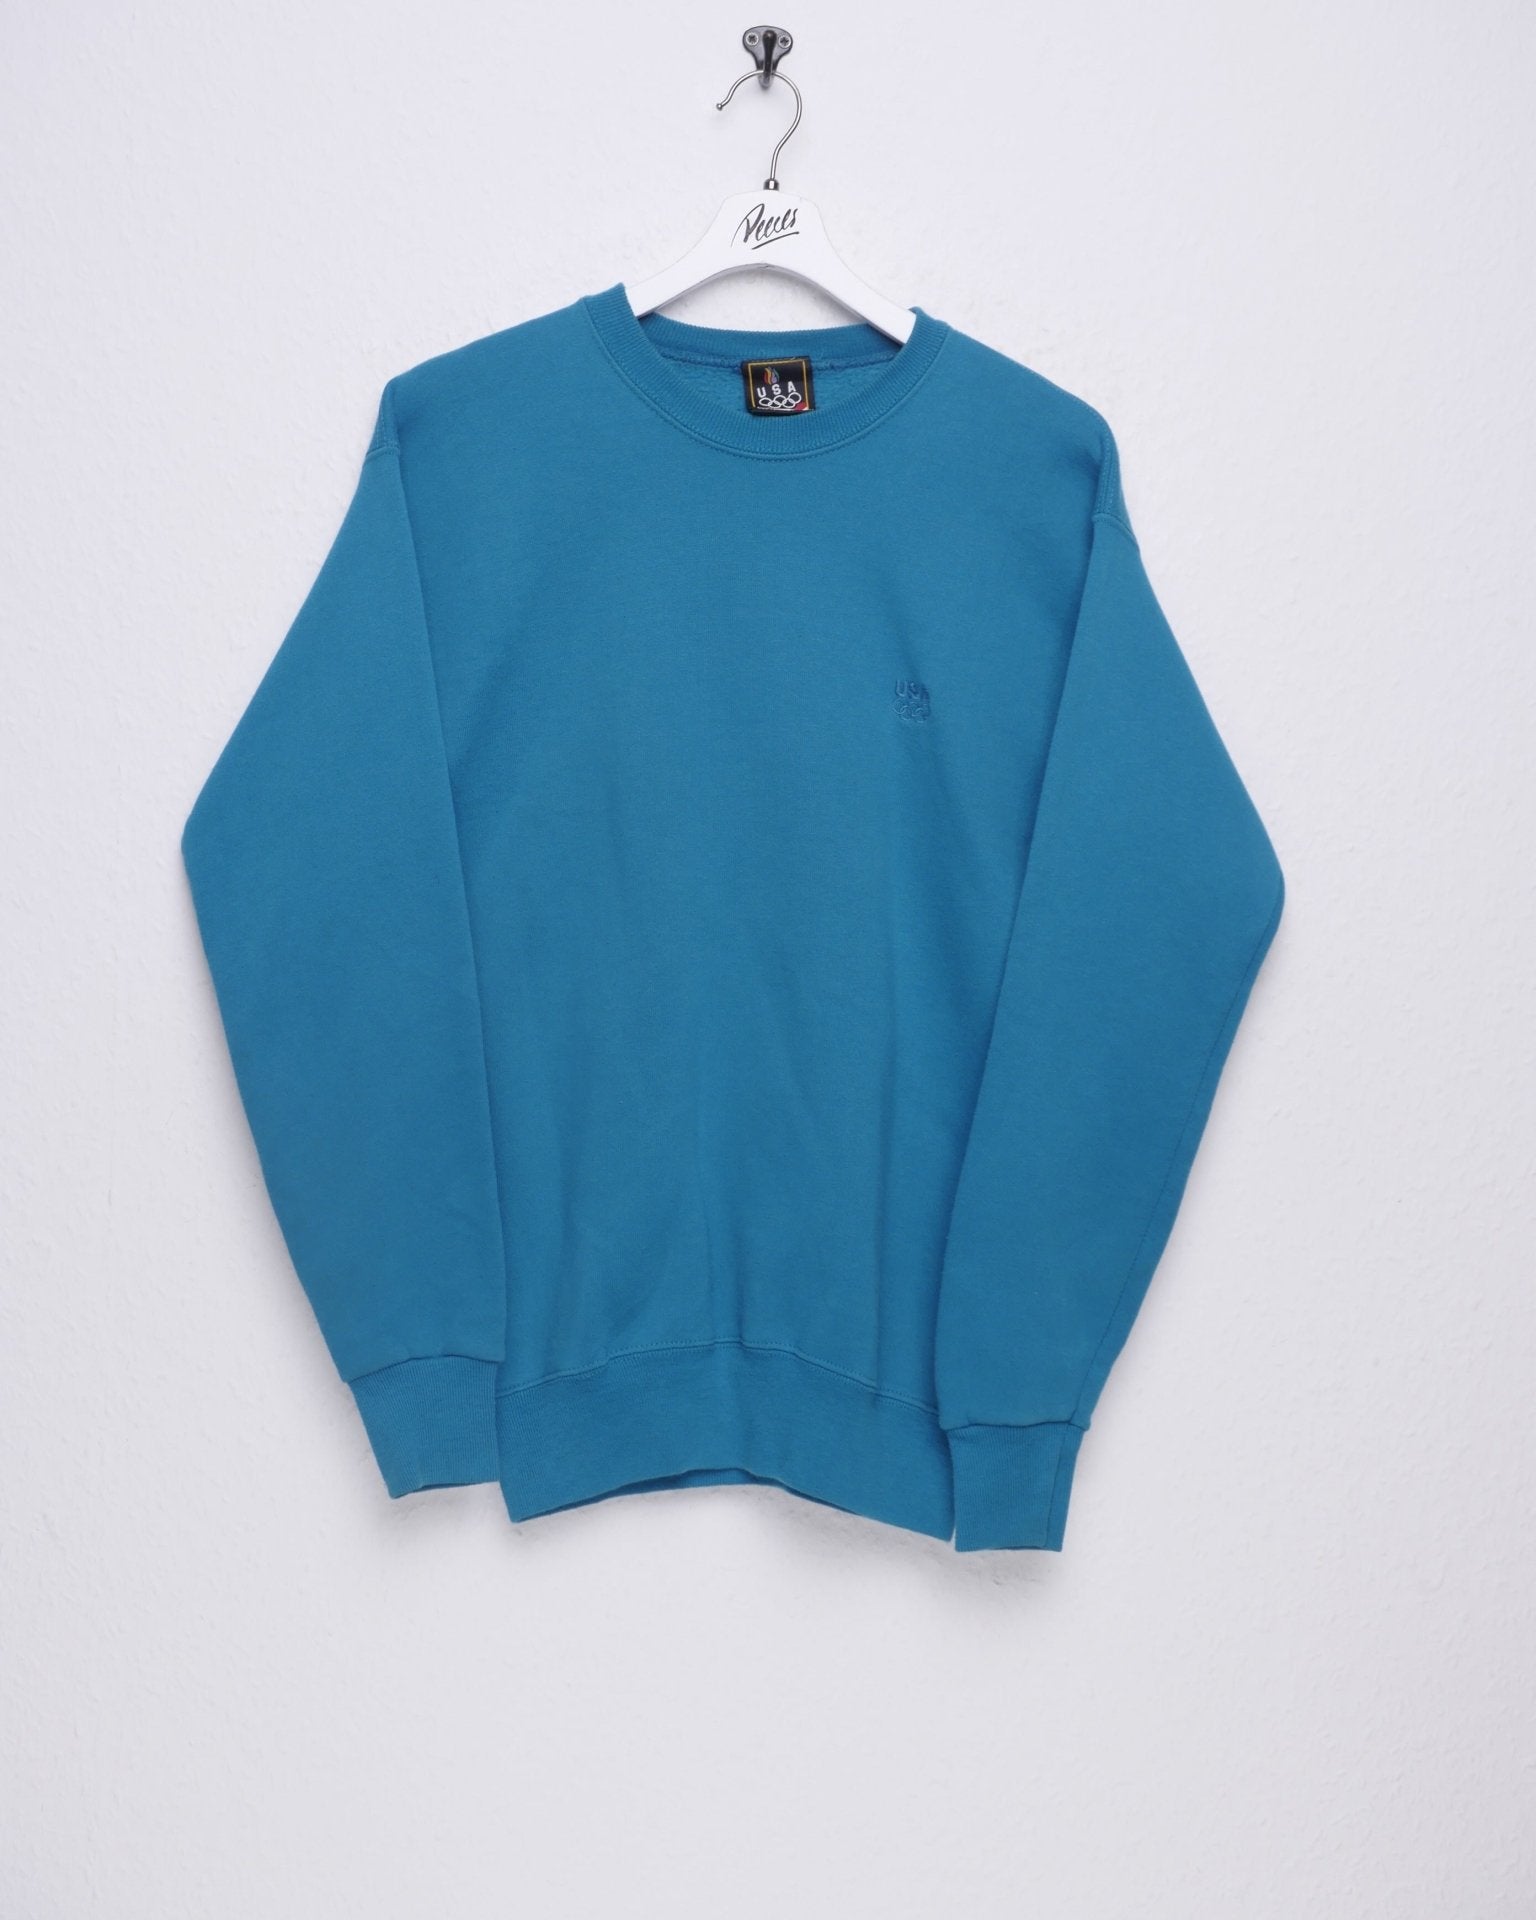 USA Olympia embroidered Logo turquoise Sweater - Peeces